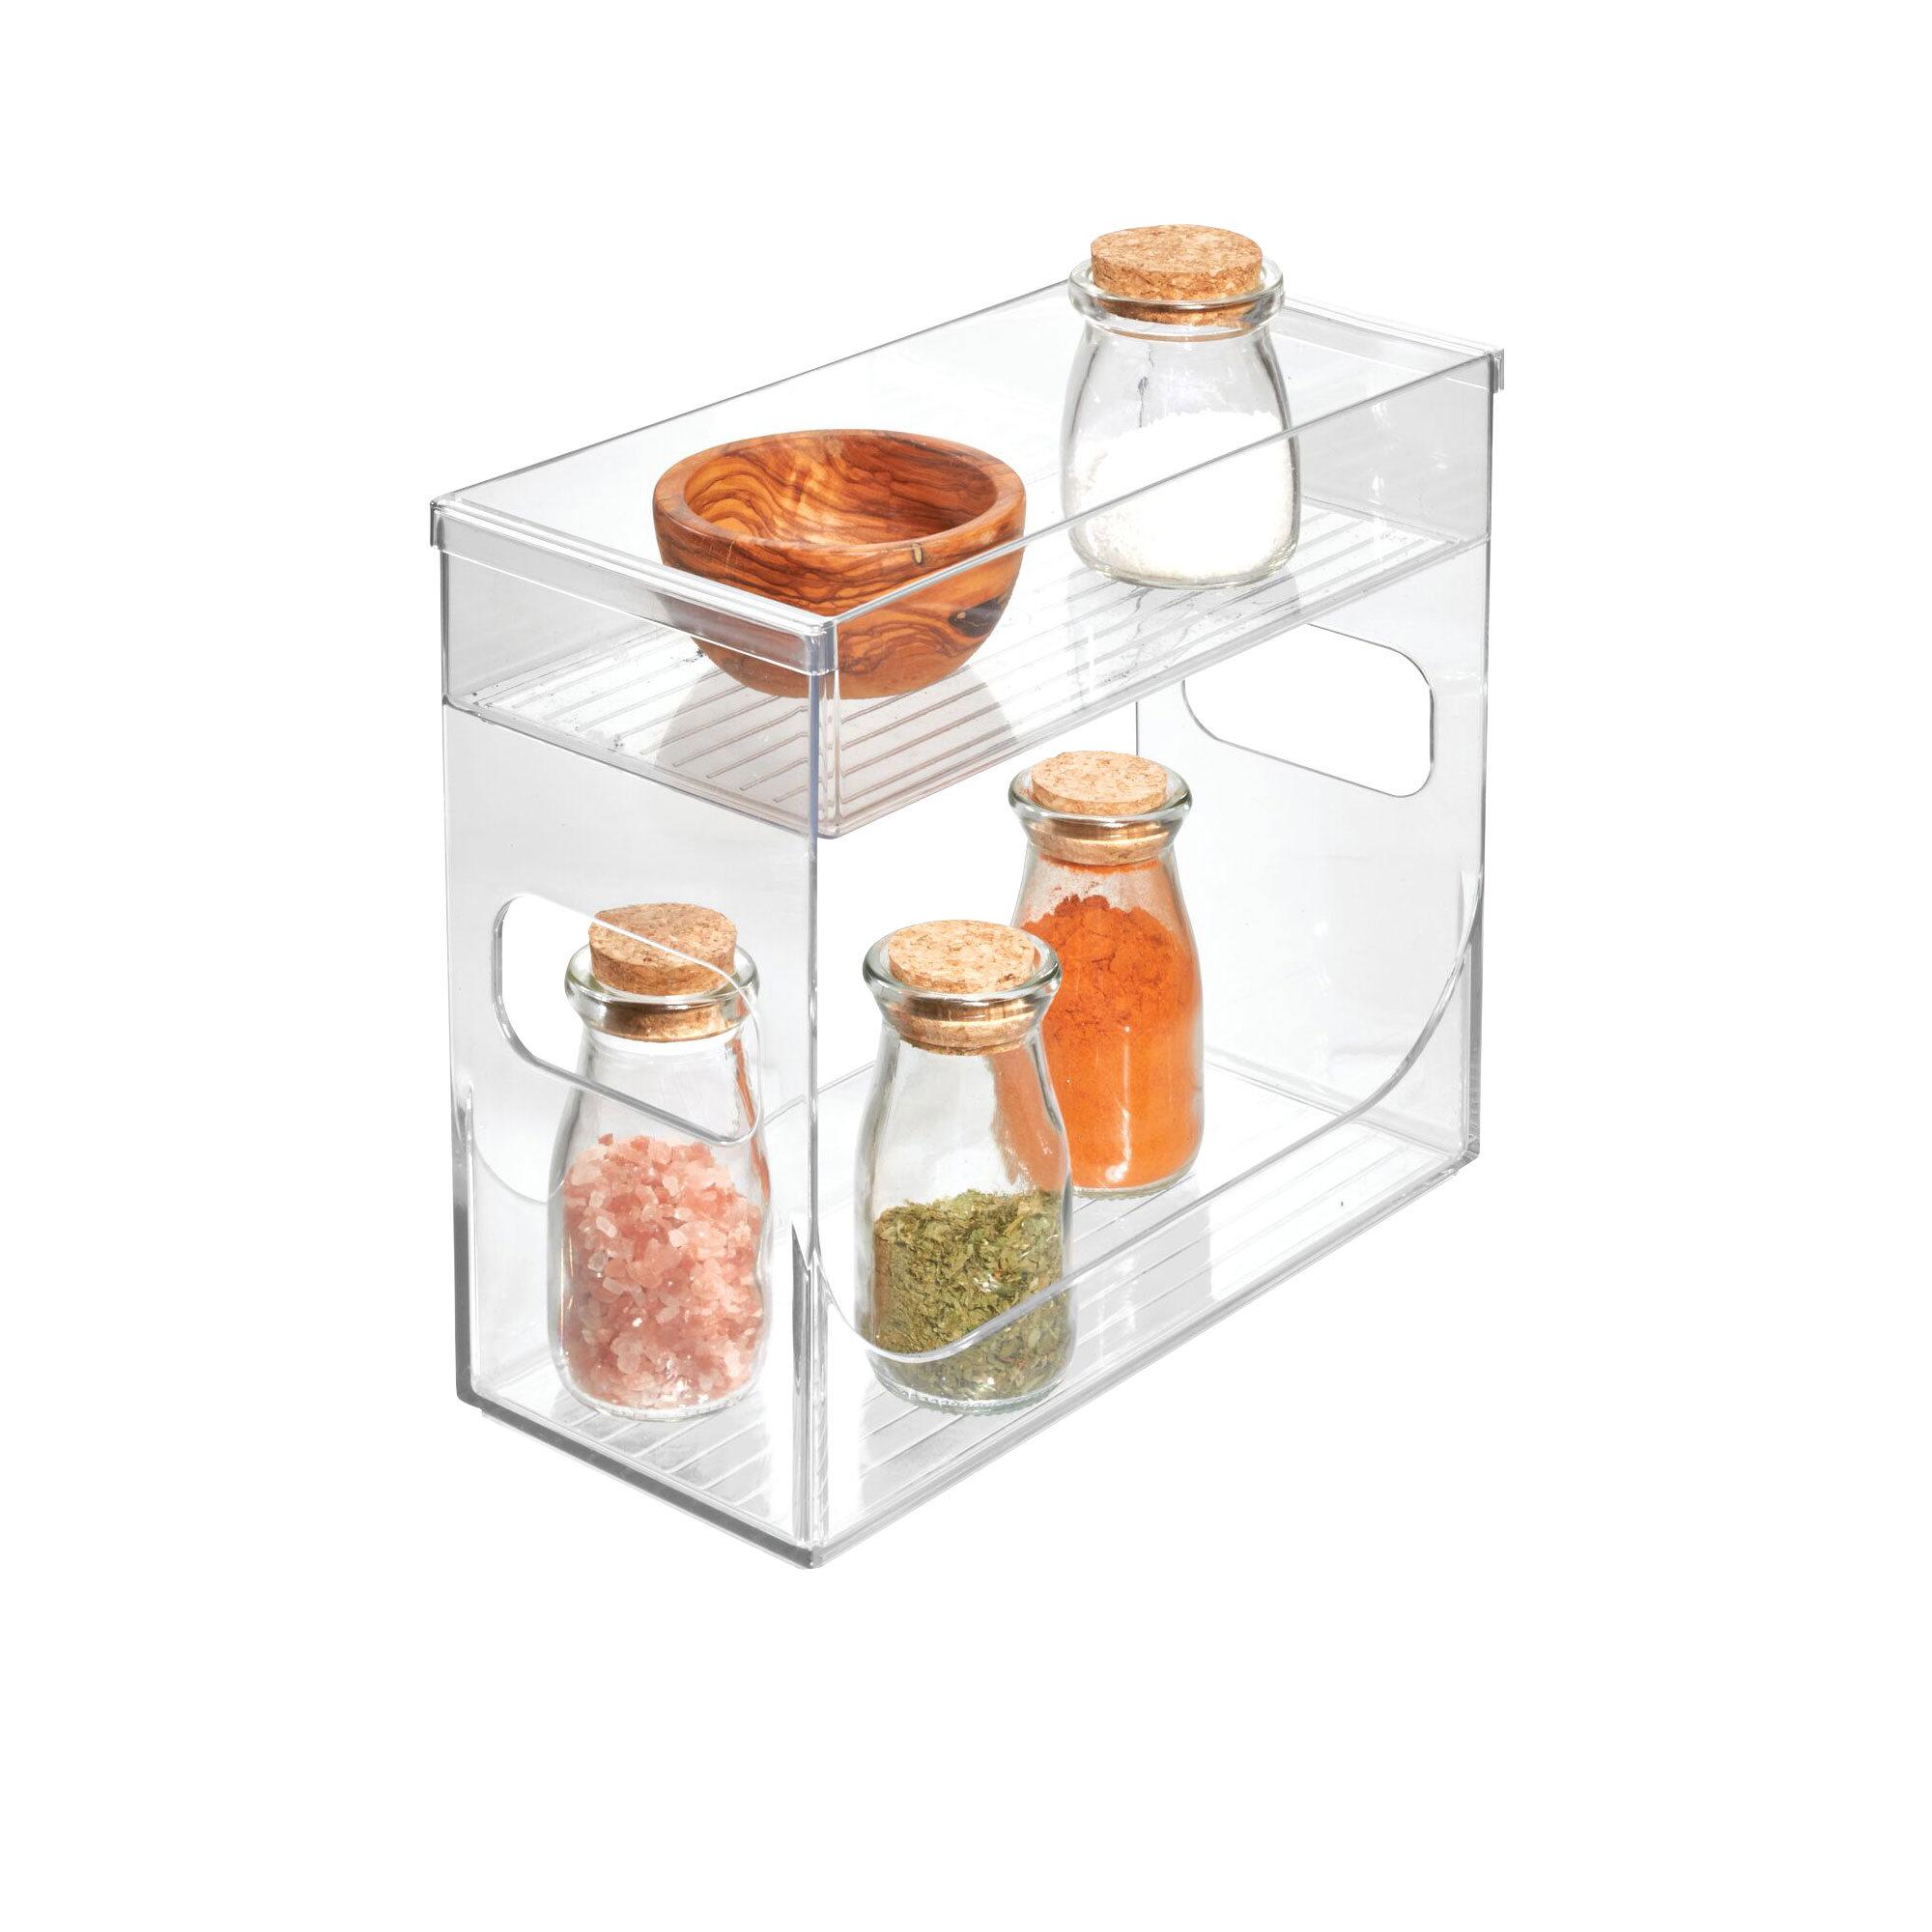 iDesign Linus 2 Tier Spice Rack Clear Image 3